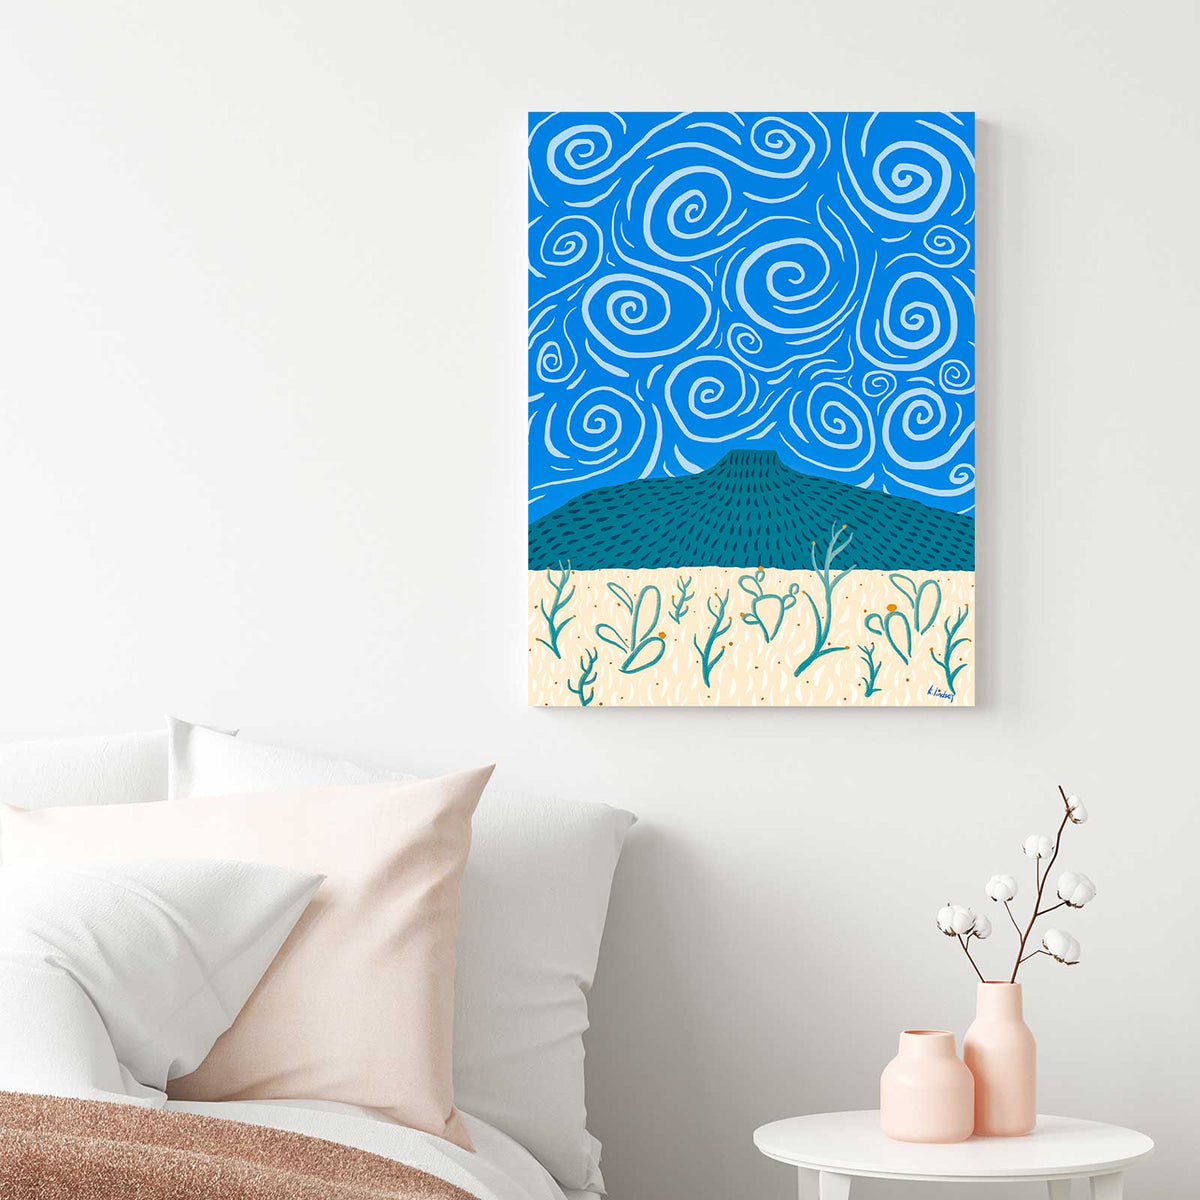 Pedernal in the Daytime - Canvas Print by Kate Lindsey | Art Bloom Canvas Art